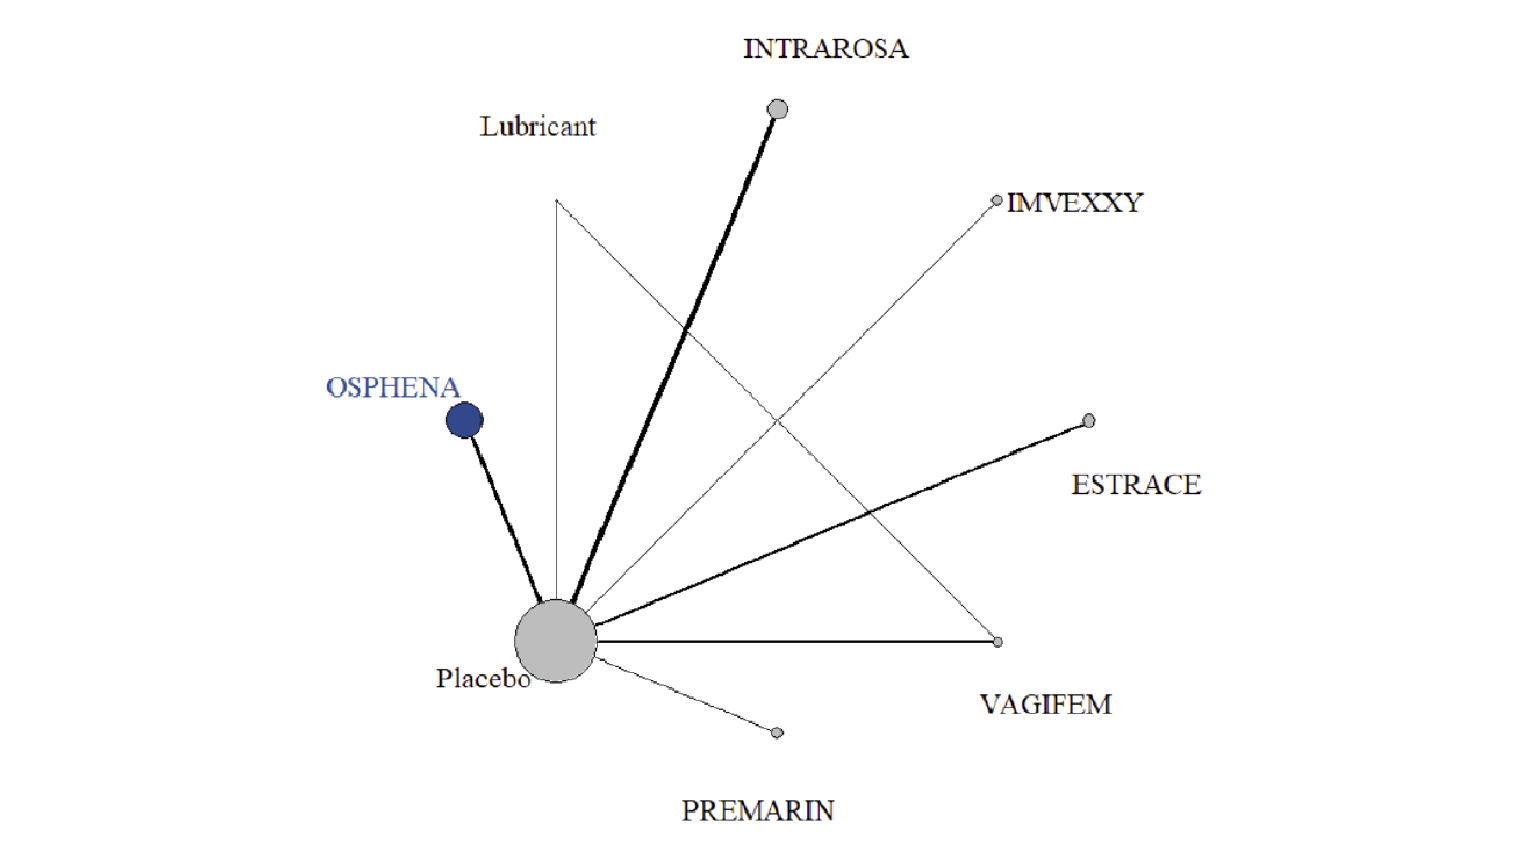 The evidence network for most bothersome symptom score reduction for dyspareunia at 12 weeks is shown for the sponsor-submitted ITC. In the network, Osphena, lubricant, Intrarosa, Imvexxy, Estrace, Vagifem, and Premarin are connected to each other indirectly through the placebo node. Lubricant and Vagifem are connected directly.